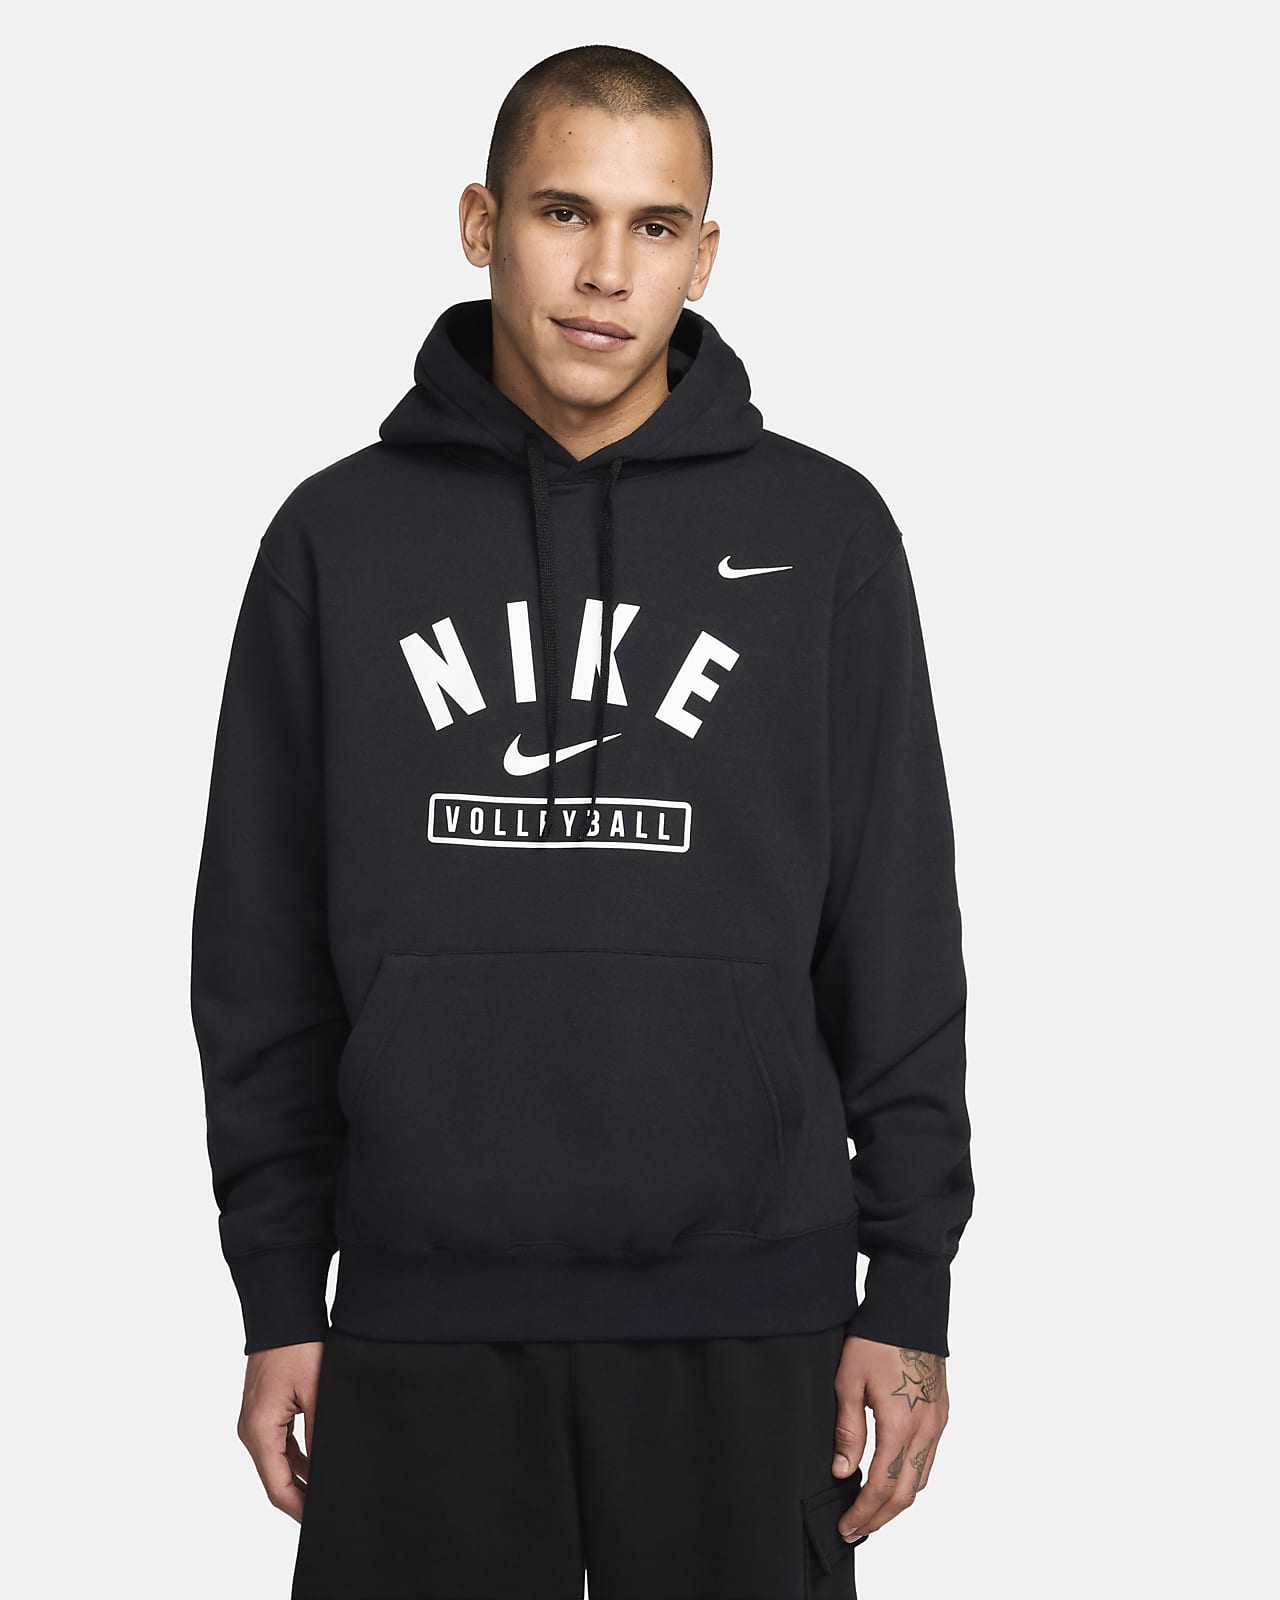 Nike Men's Volleyball Pullover Hoodie